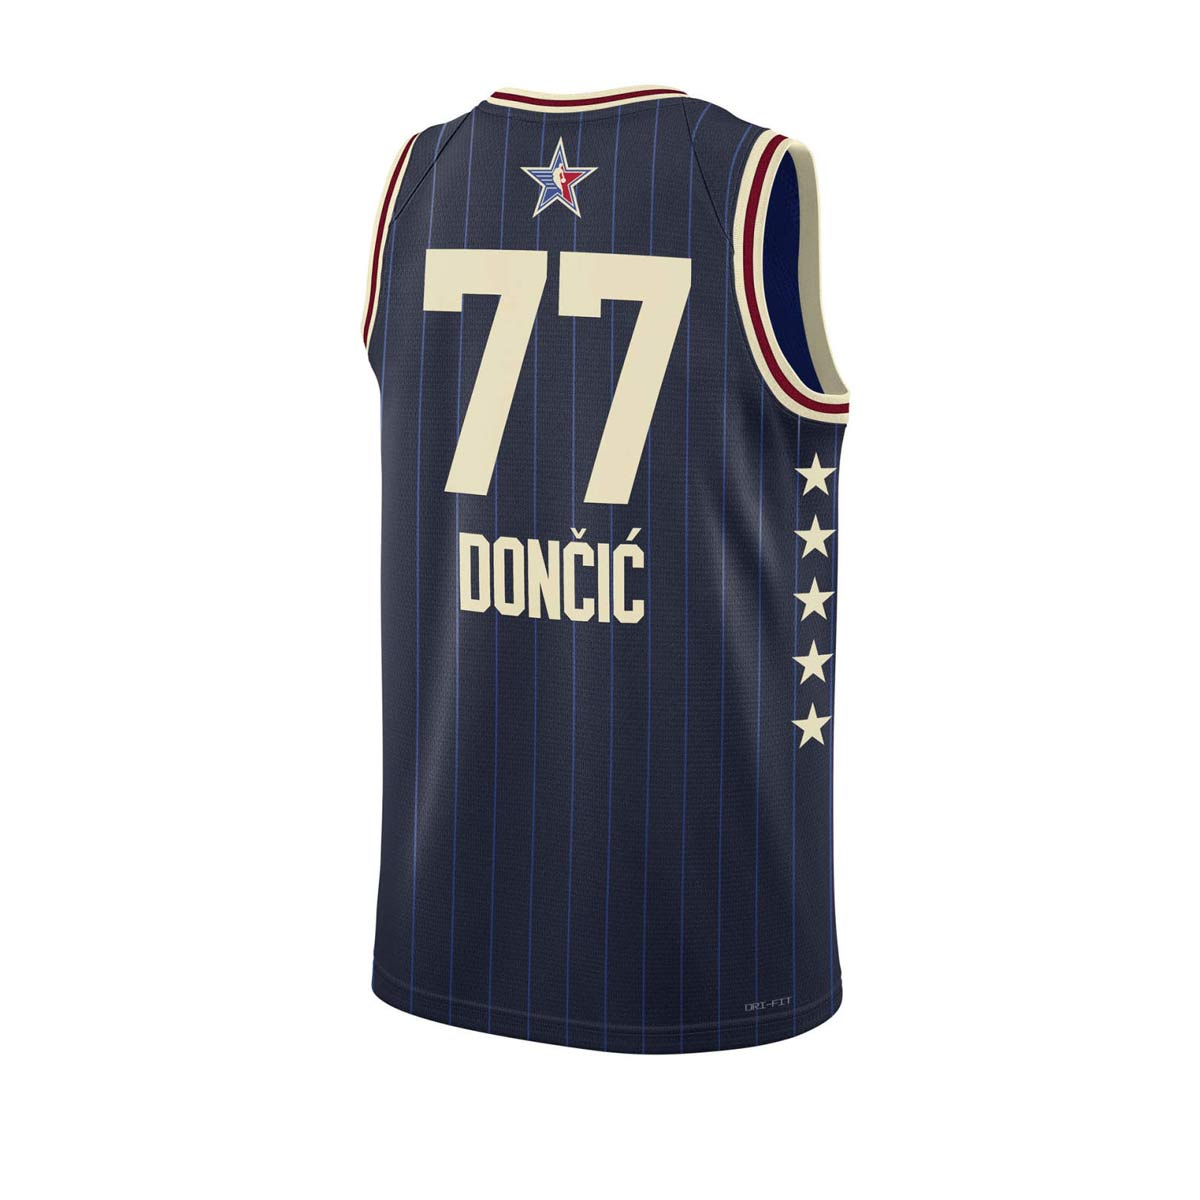 Asw Mwmn Jersey T2 '24 - Doncic